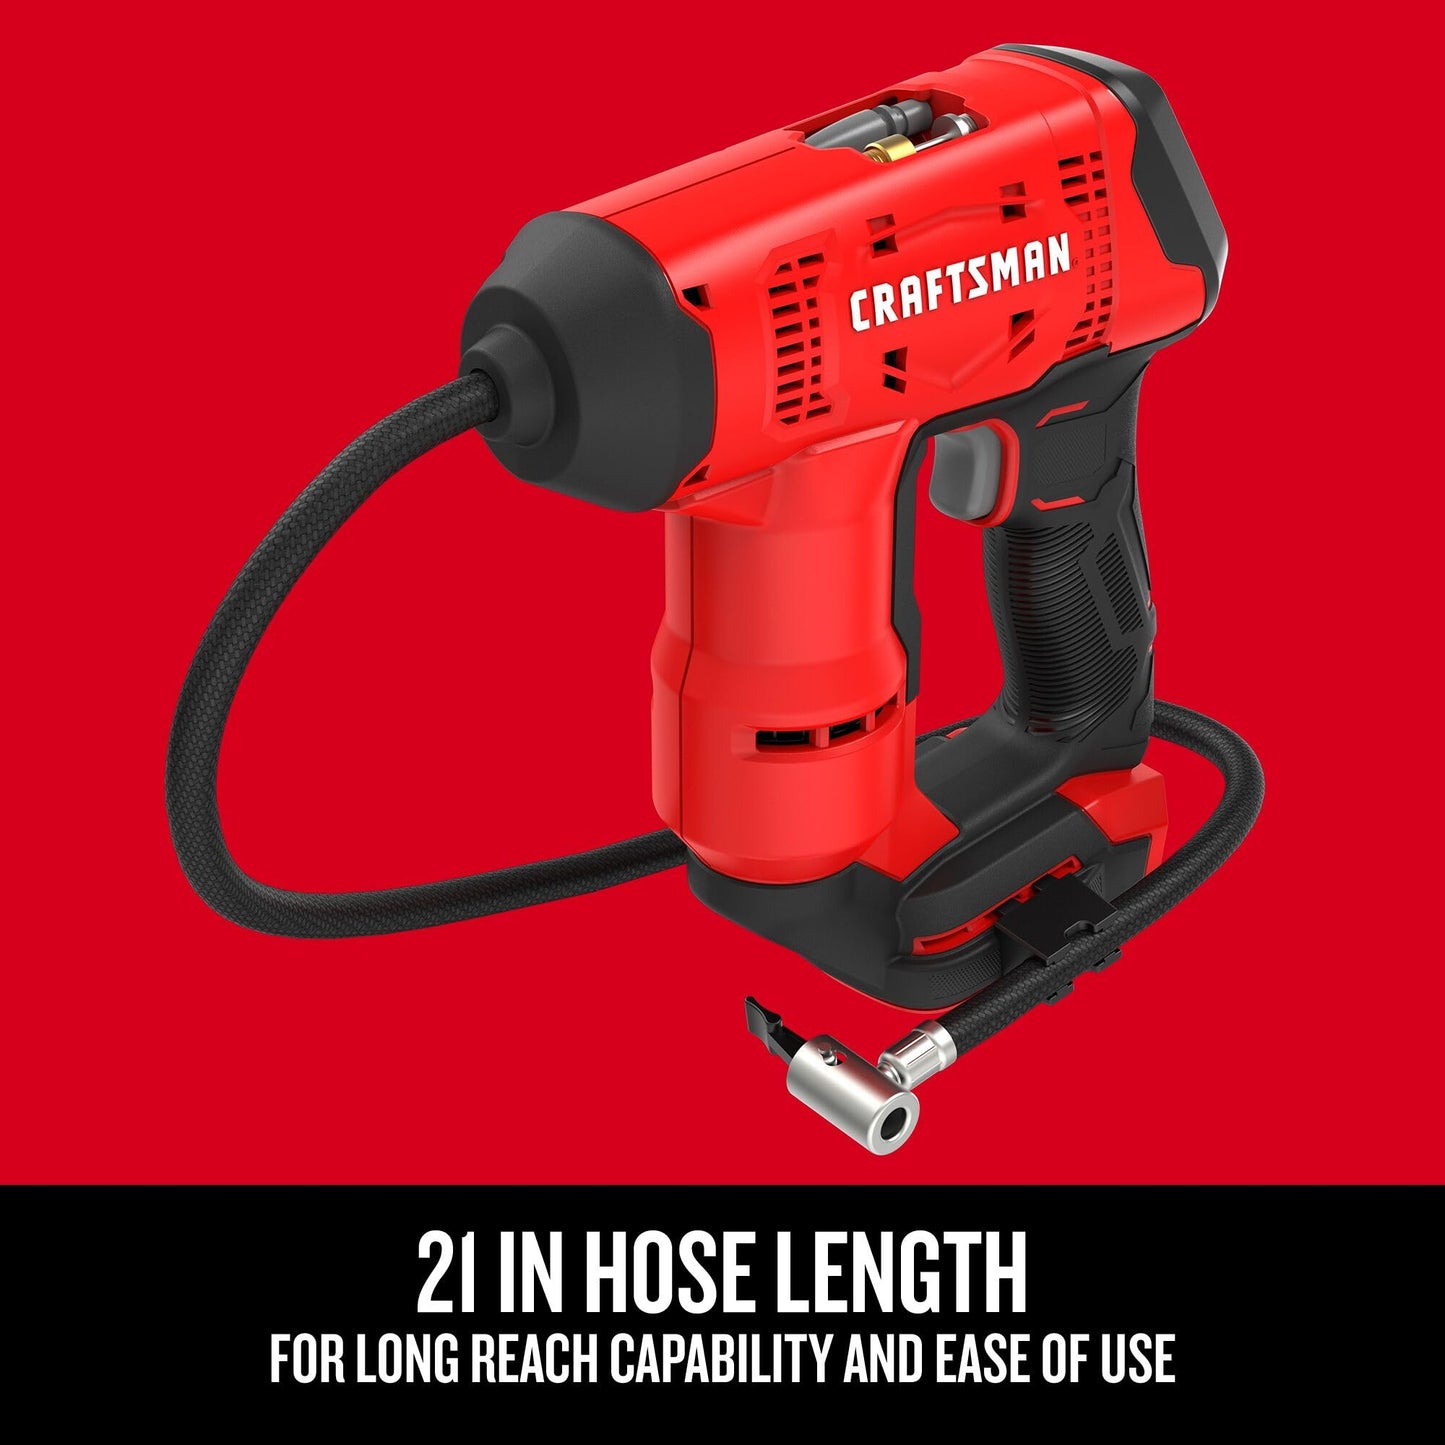 Craftsman V20 Cordless Inflator for Tires and Balls, High Pressure, PSI of 150, Bare Tool Only (CMCE521B)